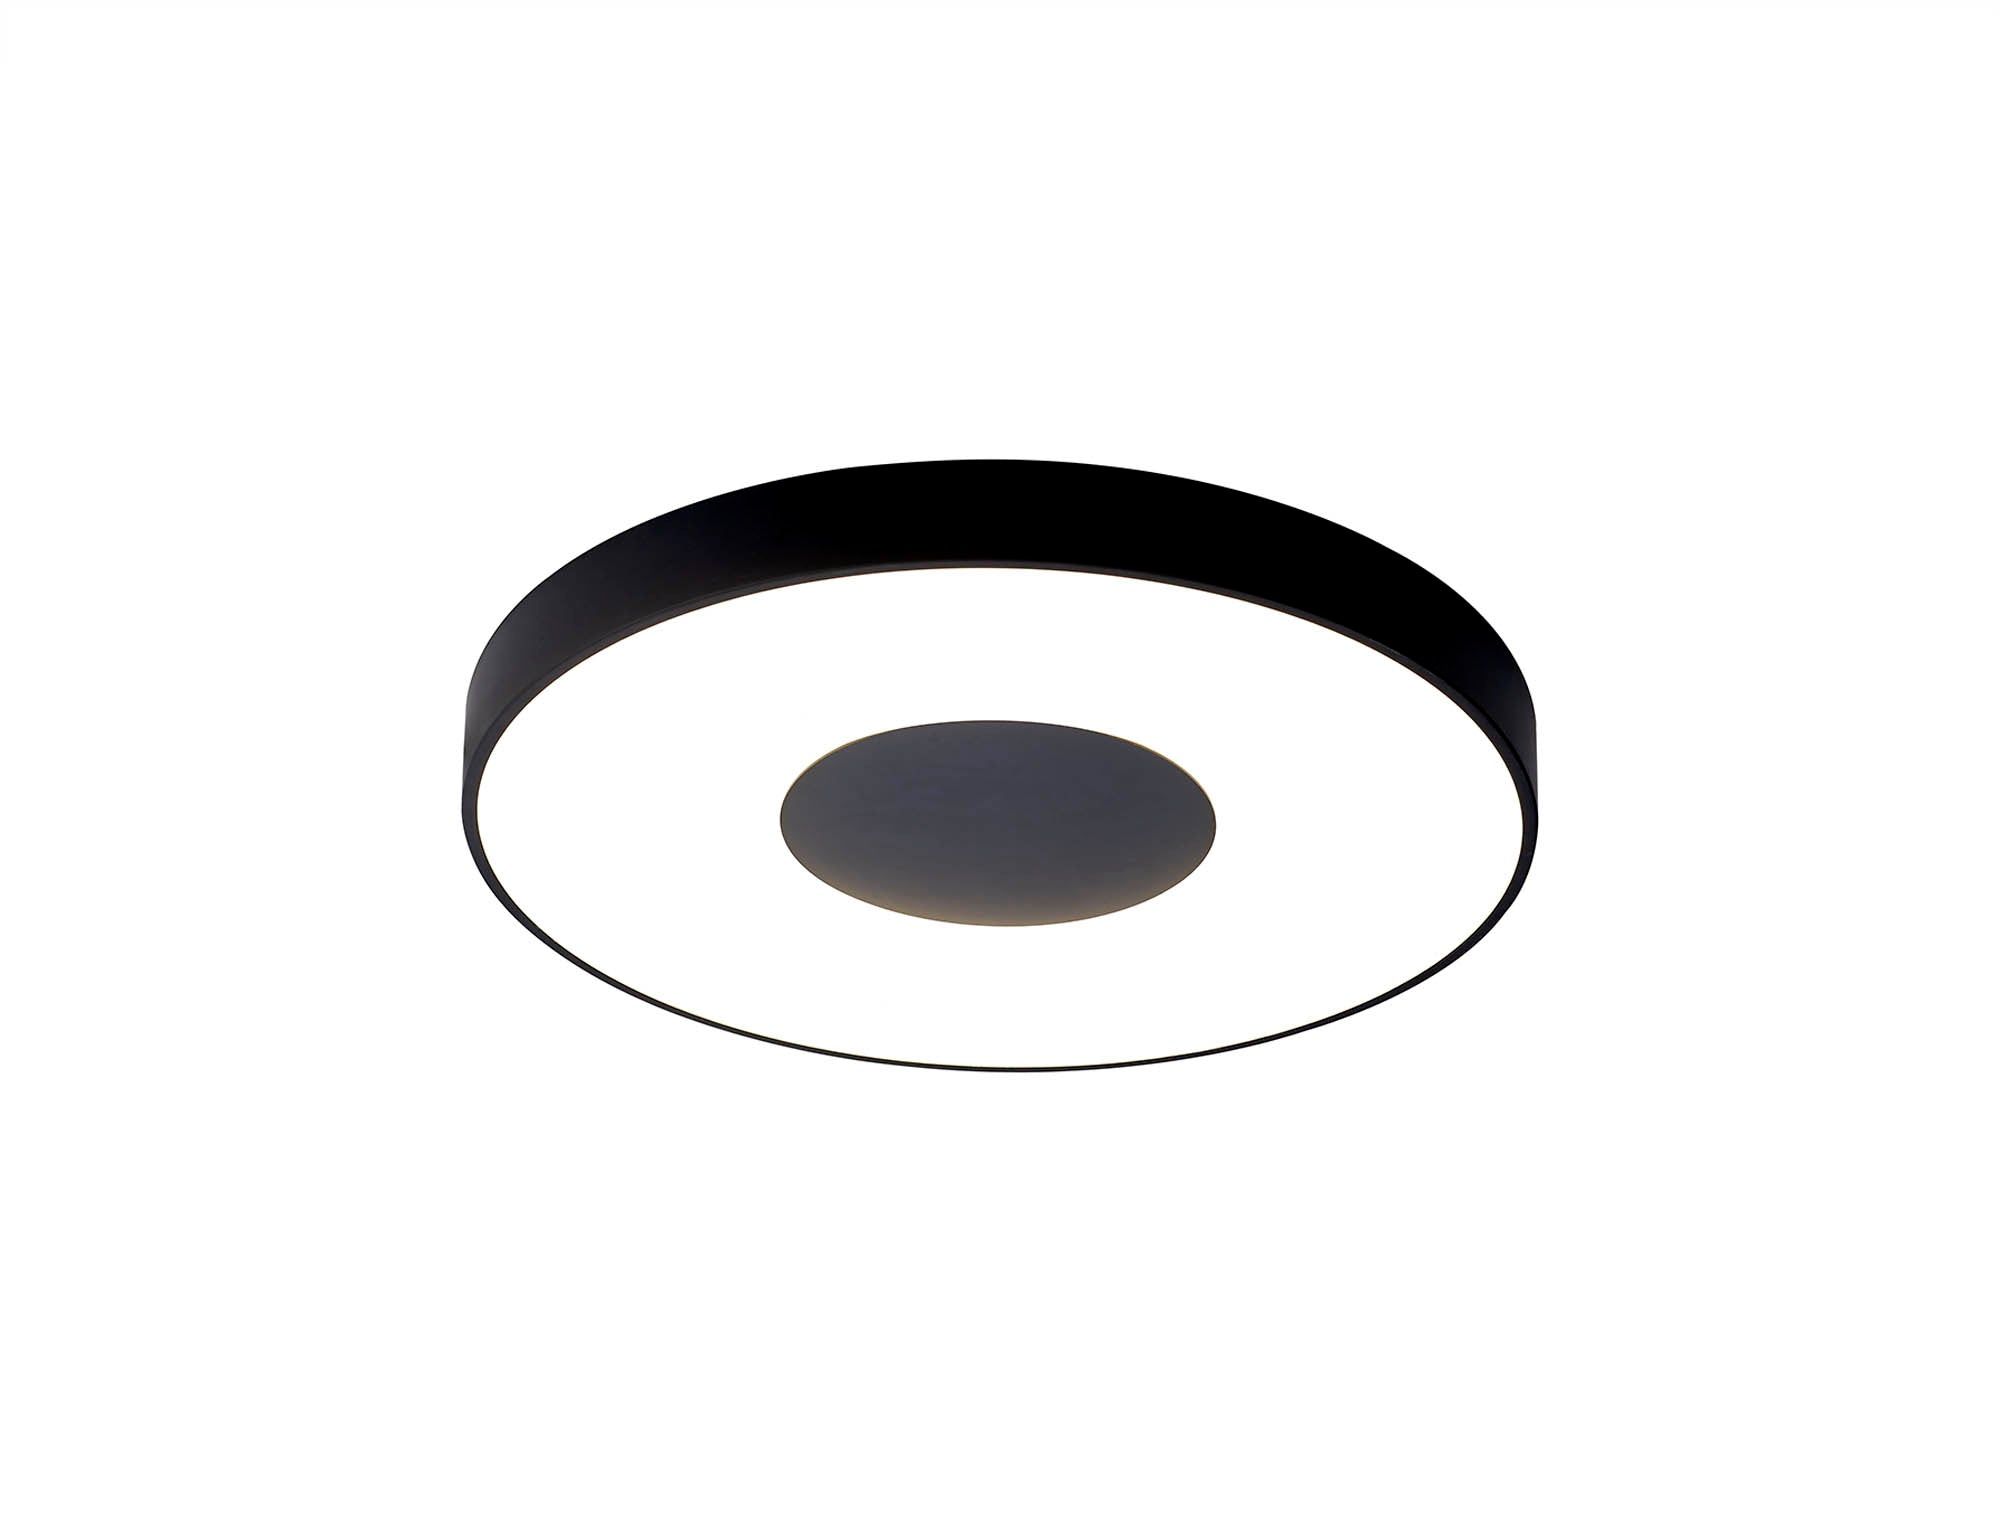 Coin Round Ceiling 80W LED With Remote Control 2700K-5000K, 3900lm, Black, 3yrs Warranty